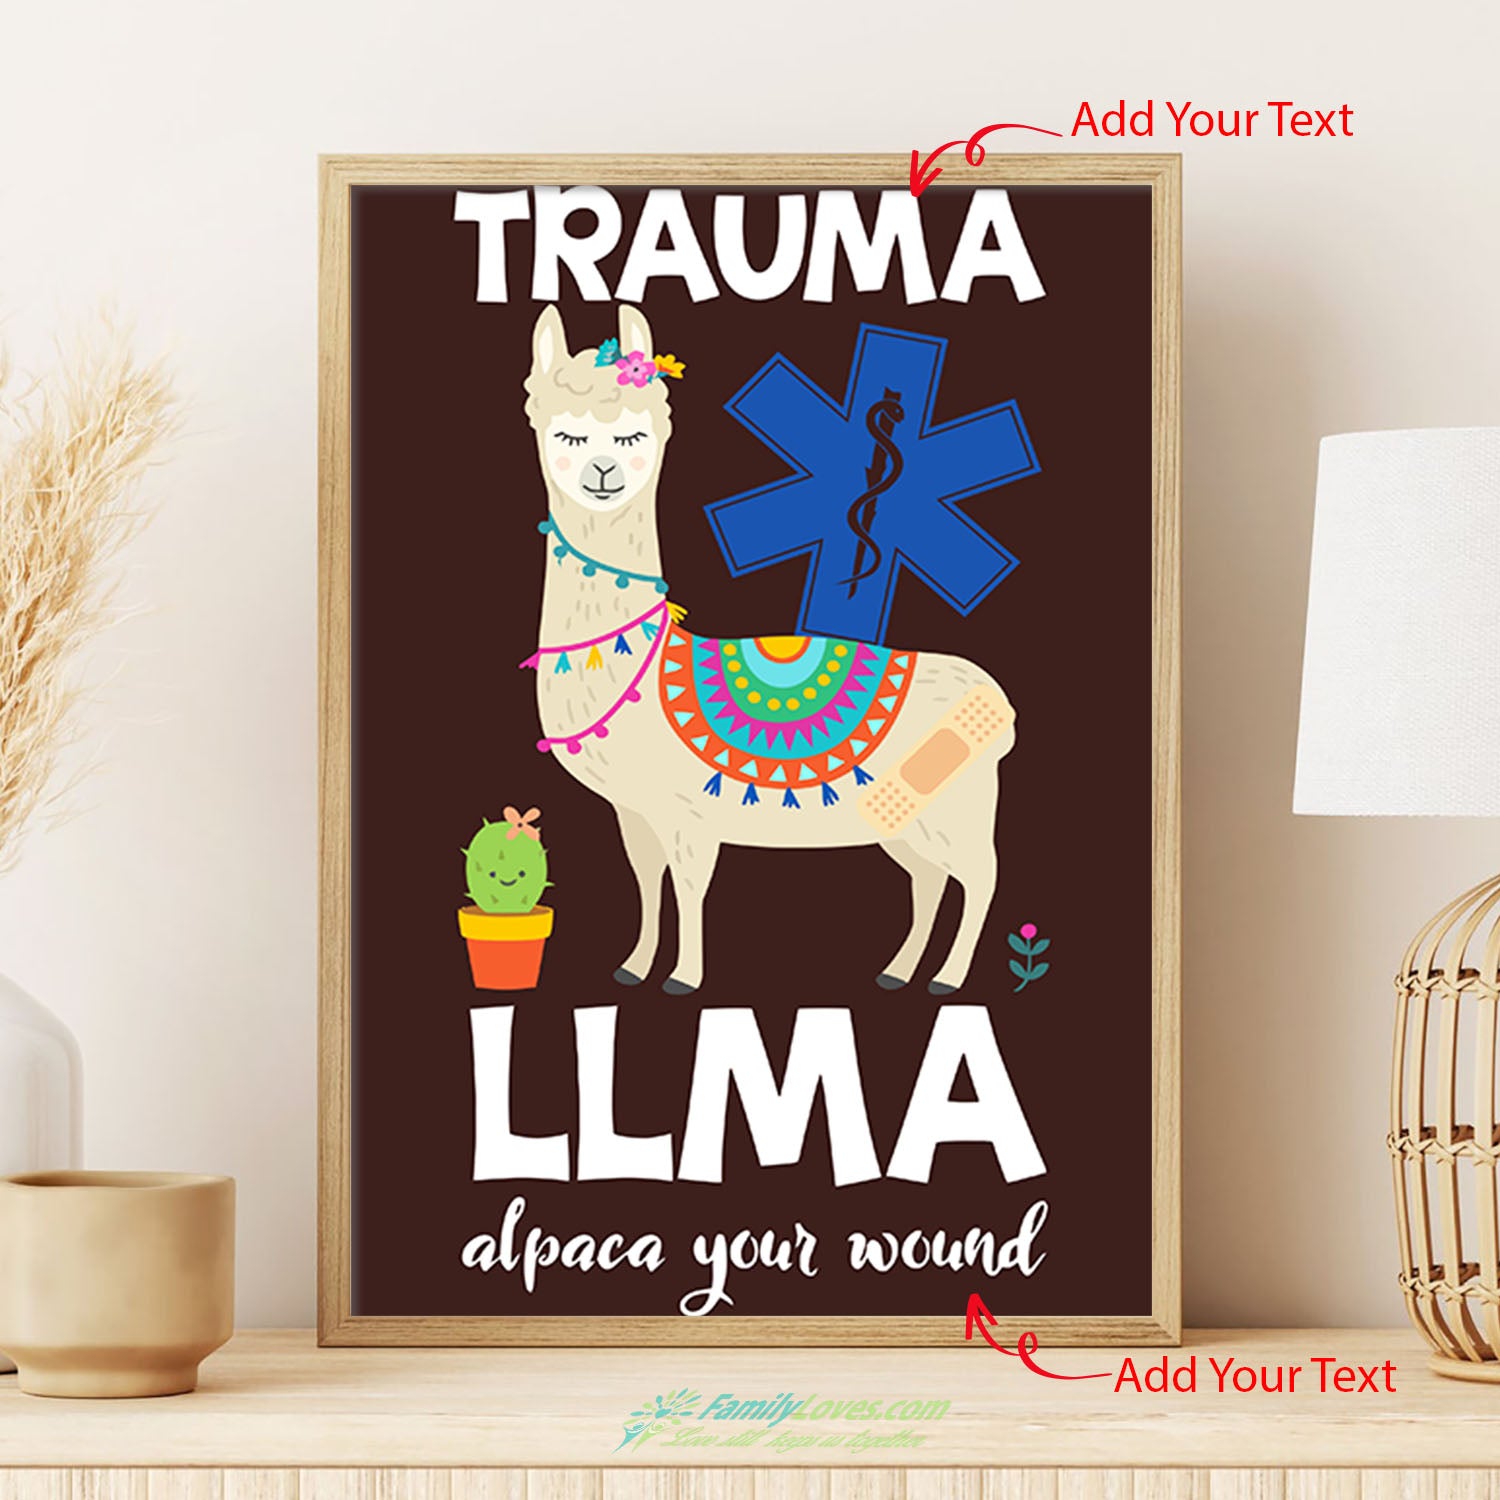 Trauma Llma Alpaca Your Wound Painting Canvas Posters All Size 1